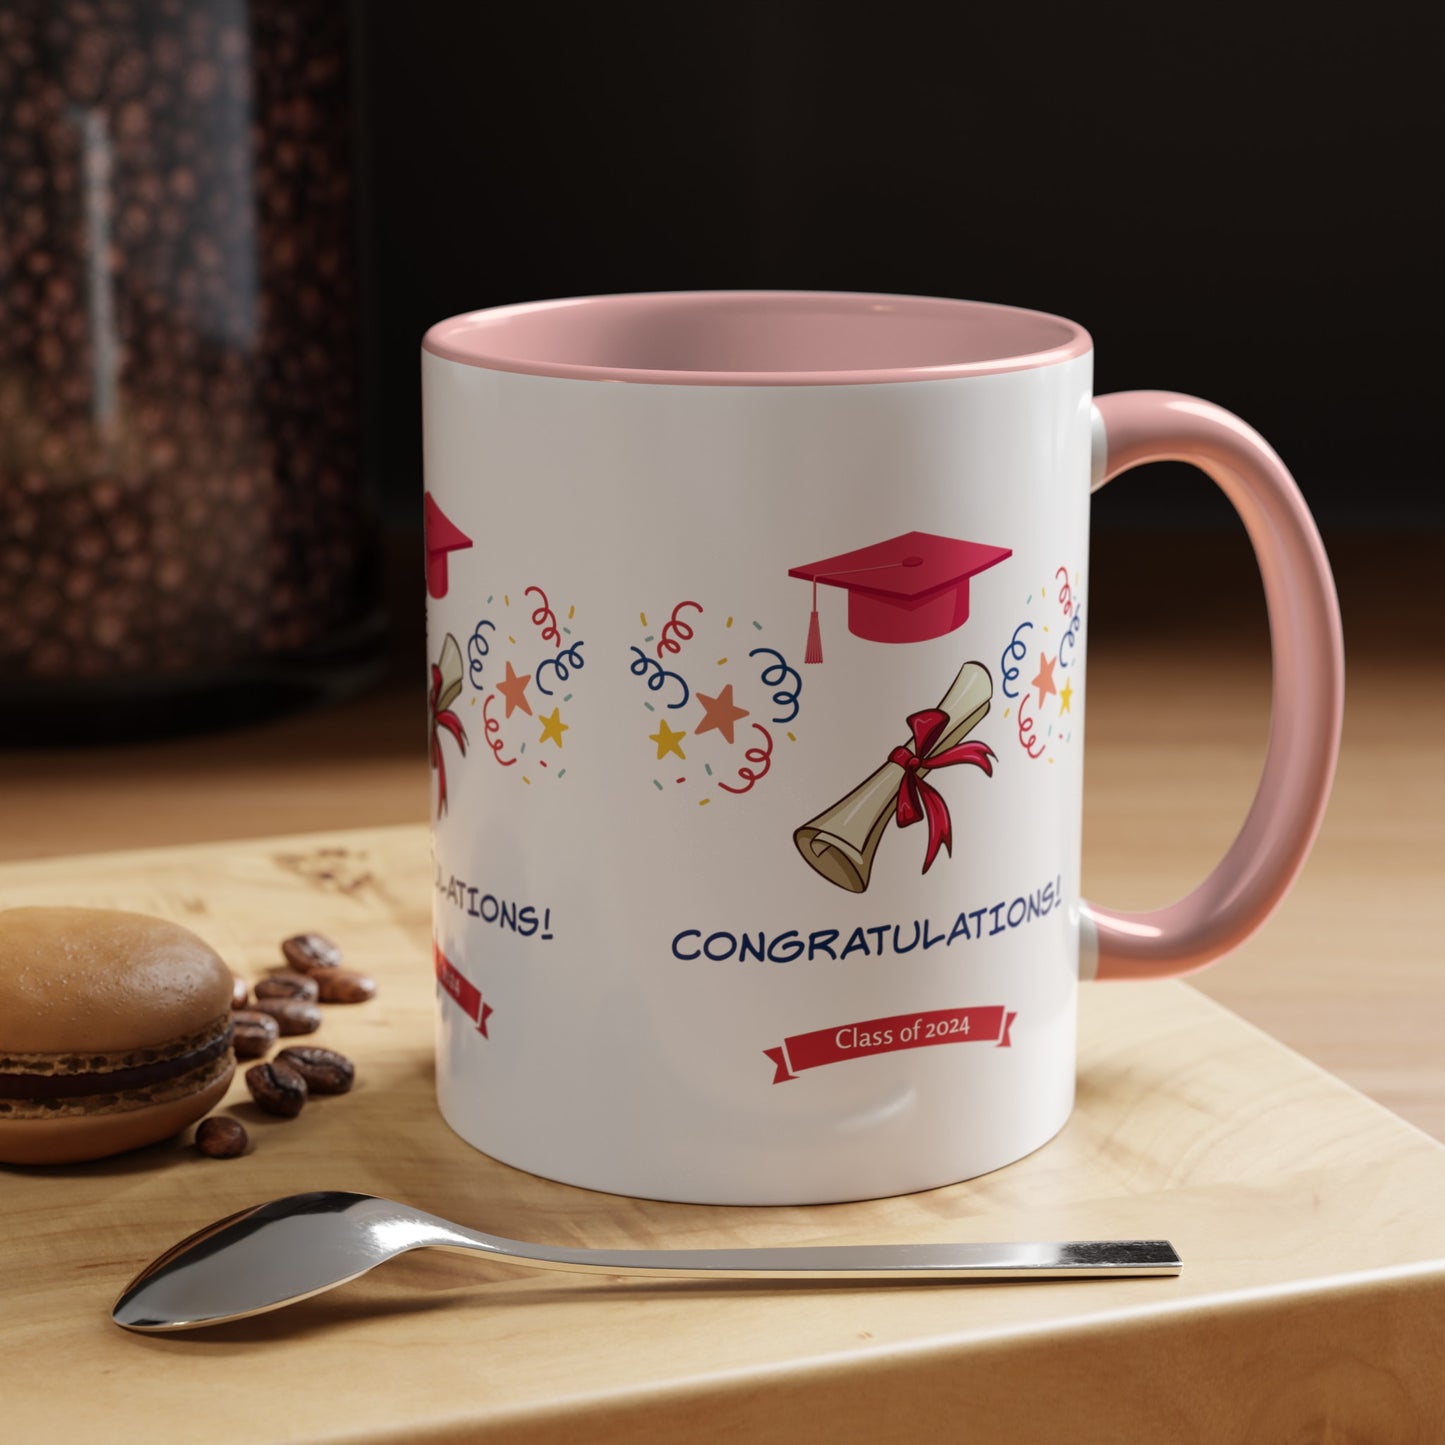 A white Printify 2024 Congratulations Mug: Graduation; 11 oz.; 2 Colors with a pink handle features graduation-themed graphics, the word "Congratulations!" and "Class of 2023" alongside a spoon, coffee beans, and a macaron on a wooden surface—an ideal custom mug to celebrate milestones.